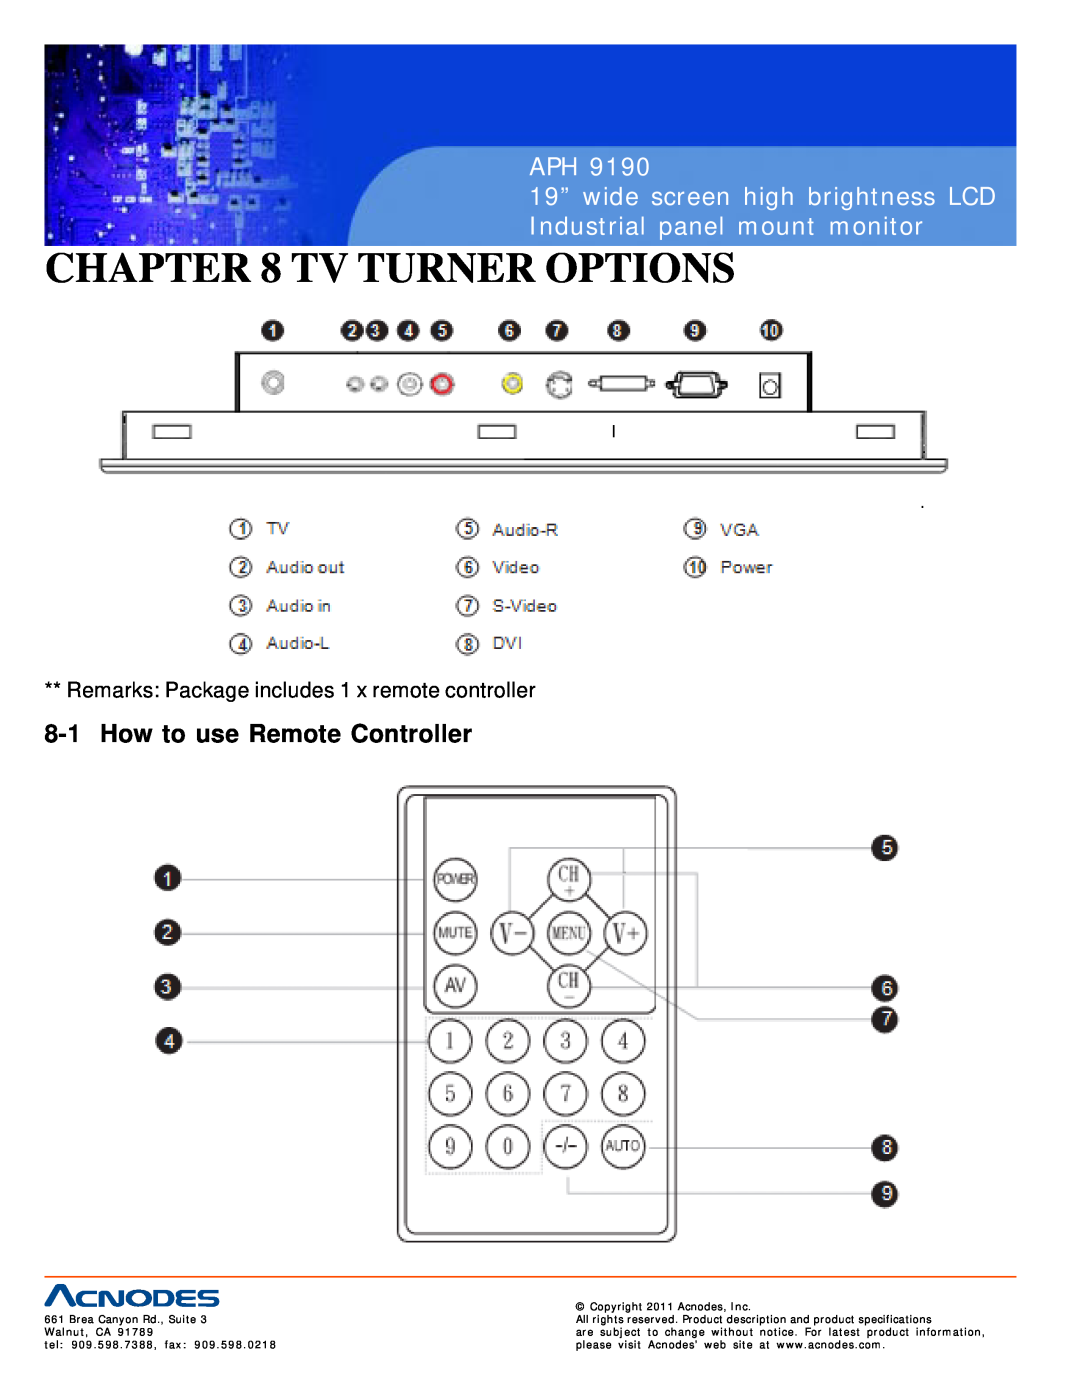 Acnodes APH 9190 Tv Turner Options, How to use Remote Controller, Copyright 2011 Acnodes, Inc, Brea Canyon Rd., Suite 